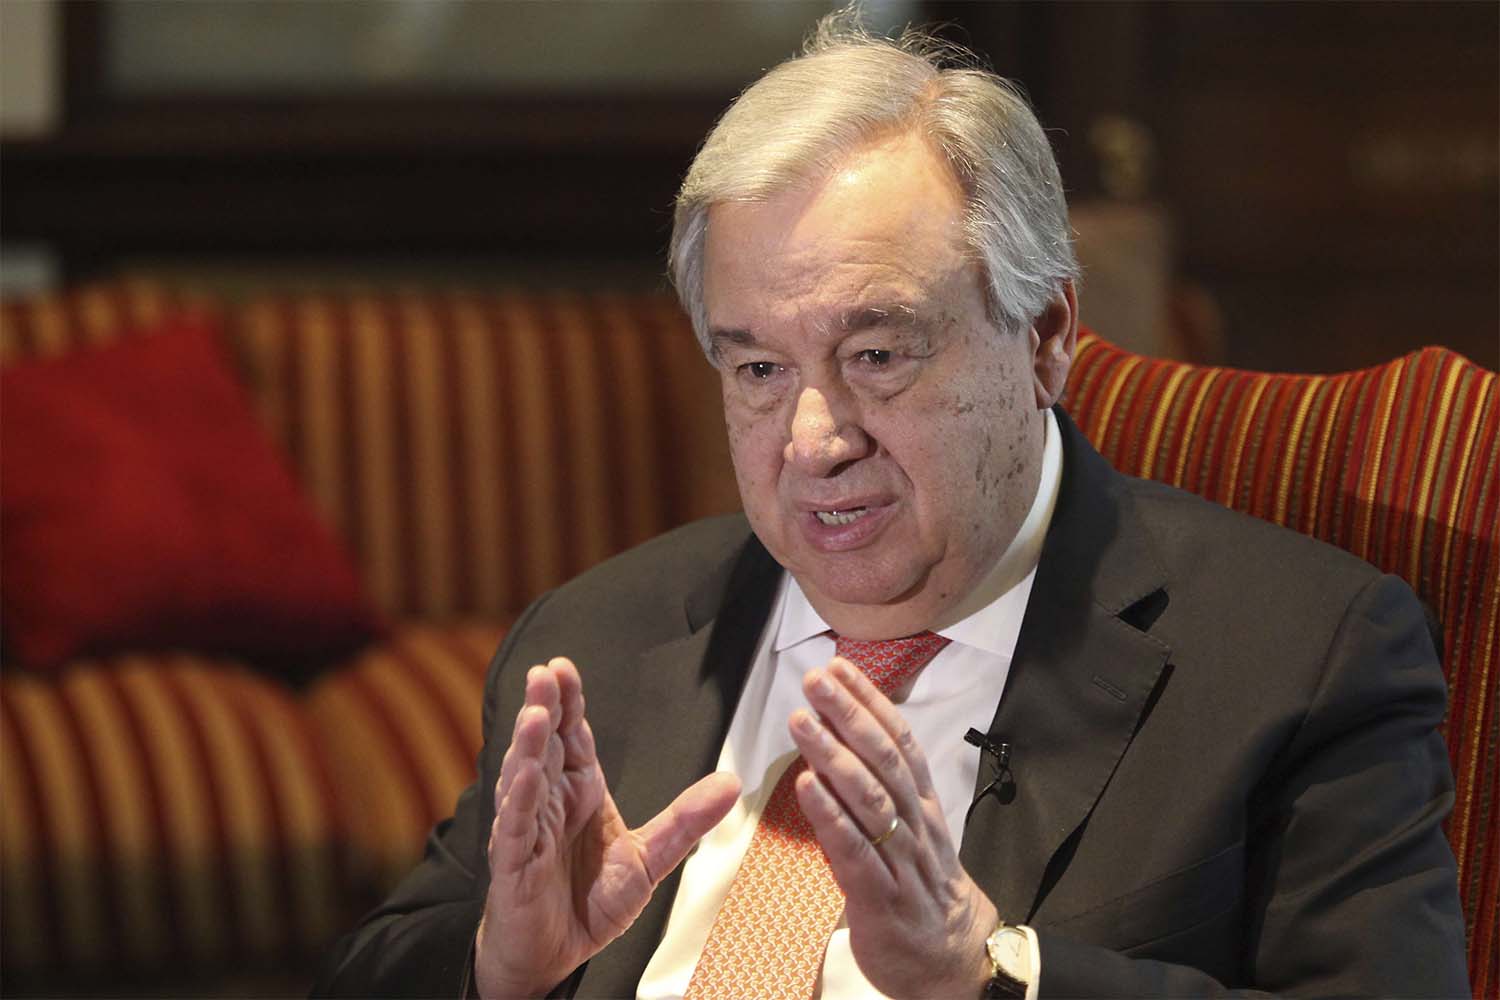 Guterres noted the opposition to annexation, including within Israeli society